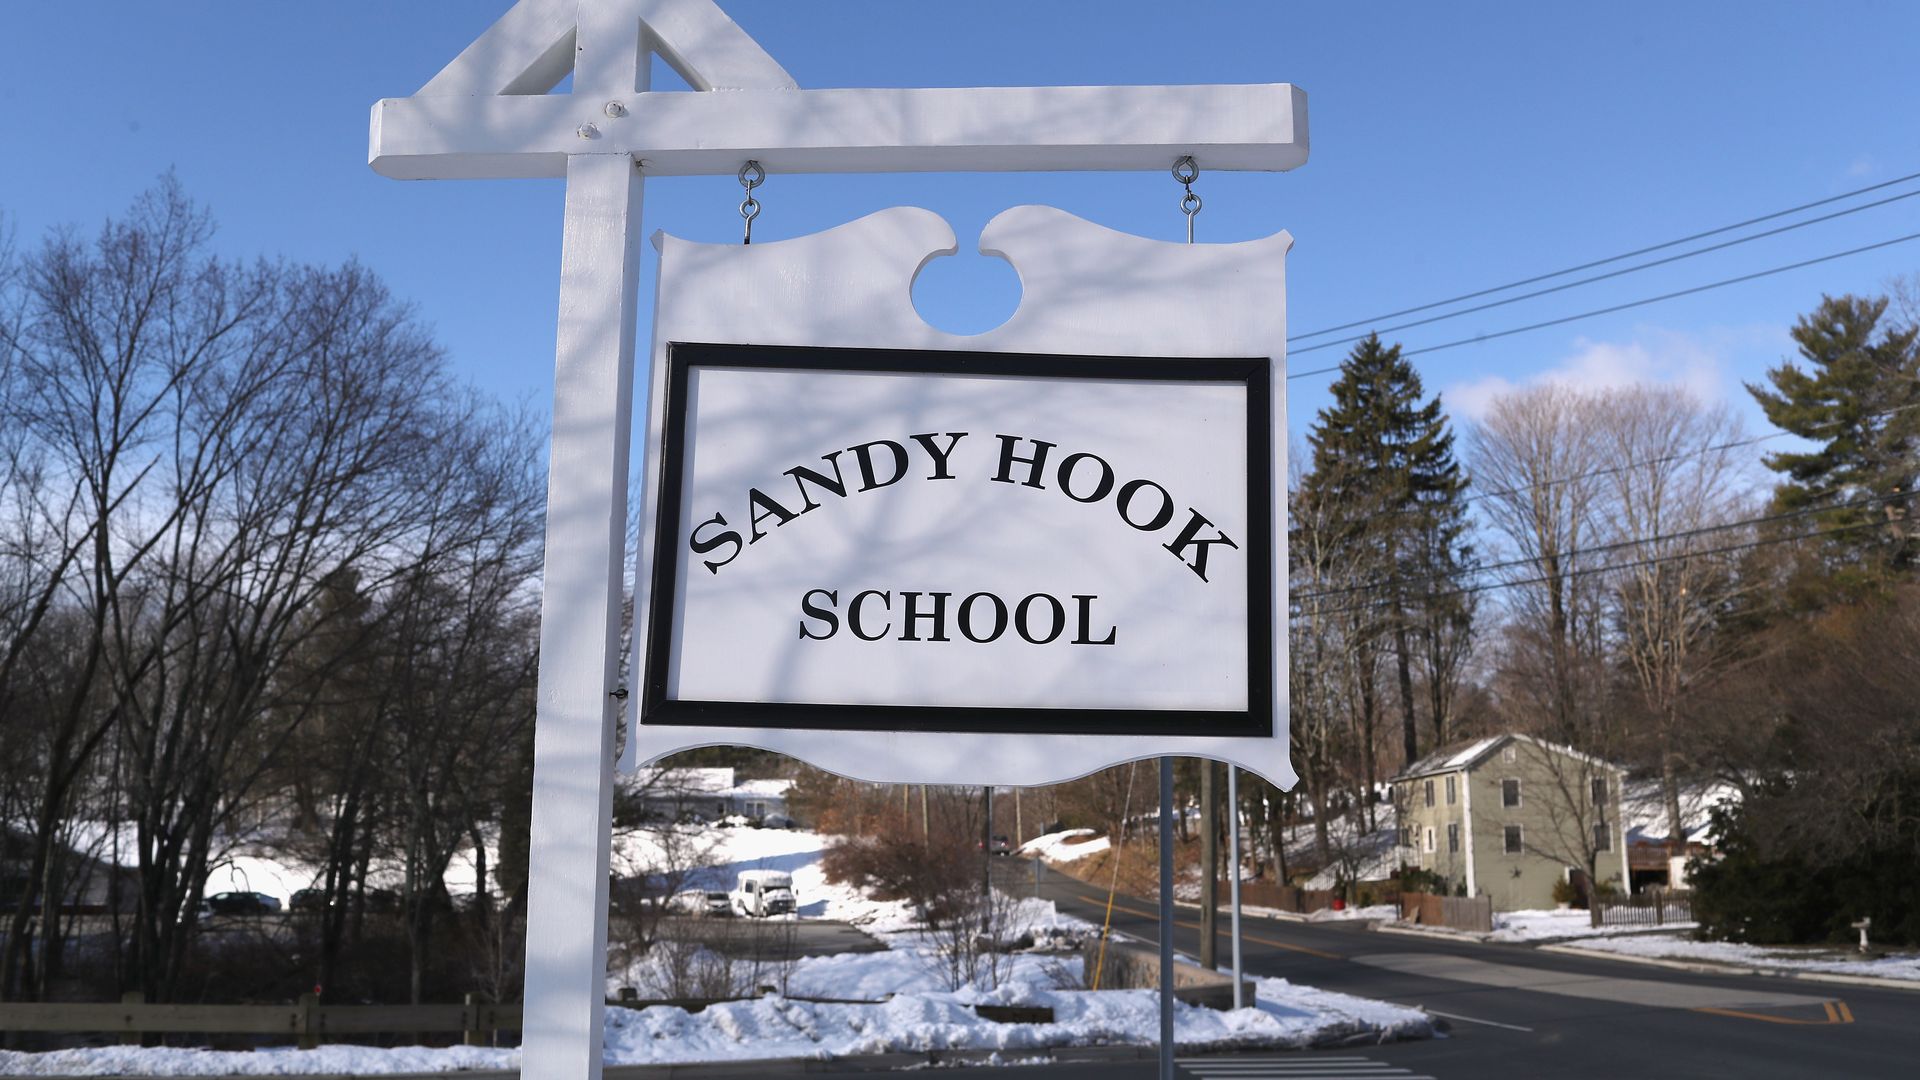 A sign marks the entrance to the Sandy Hook Elementary School, where 26 teachers and students were shot and killed eight years ago Monday.